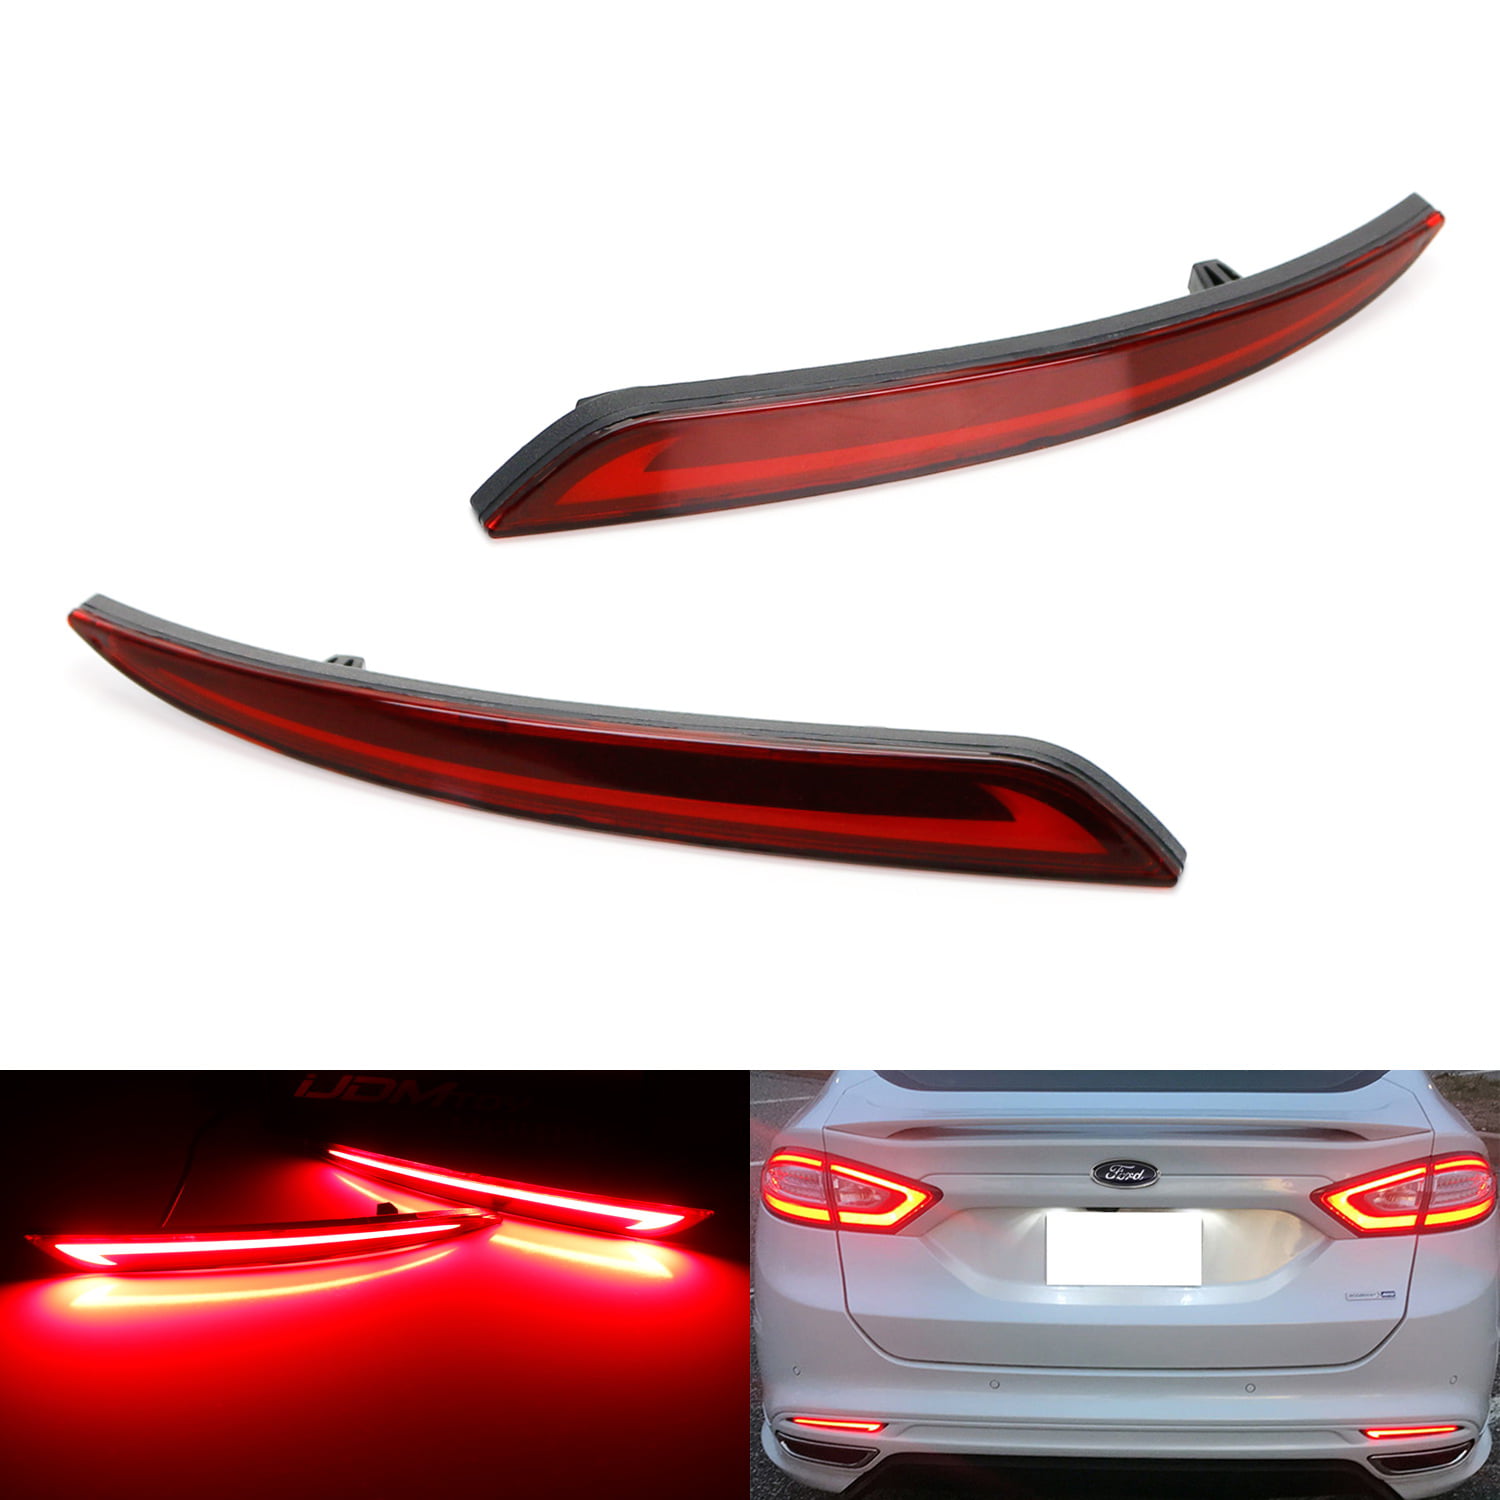 For Ford Fusion 2013 2014 2015 Red lens LED Rear Bumper Reflector Light Lamp 